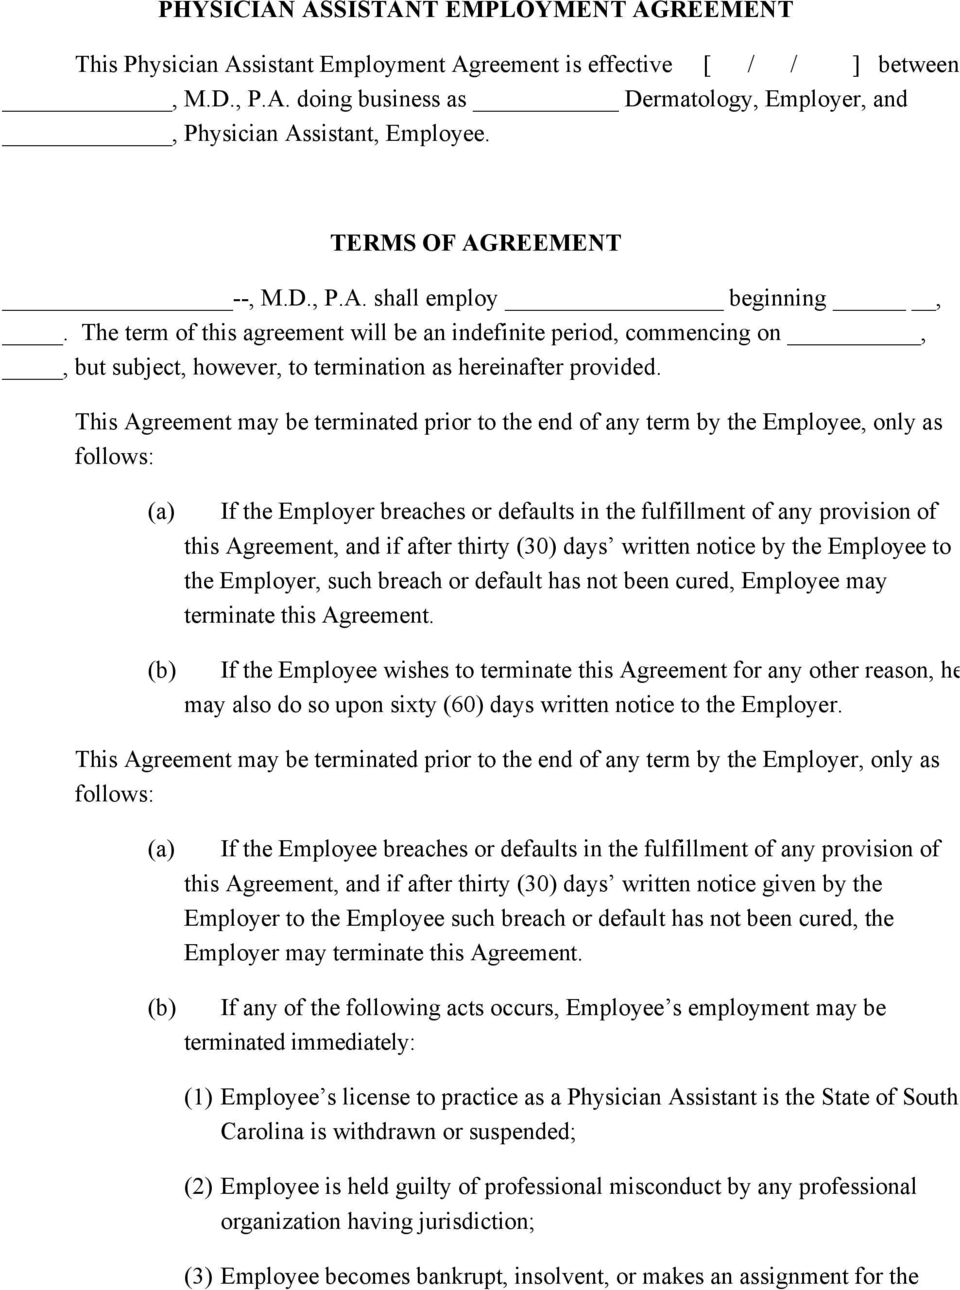 PHYSICIAN ASSISTANT EMPLOYMENT AGREEMENT TERMS OF AGREEMENT - PDF Within physician consulting agreement template